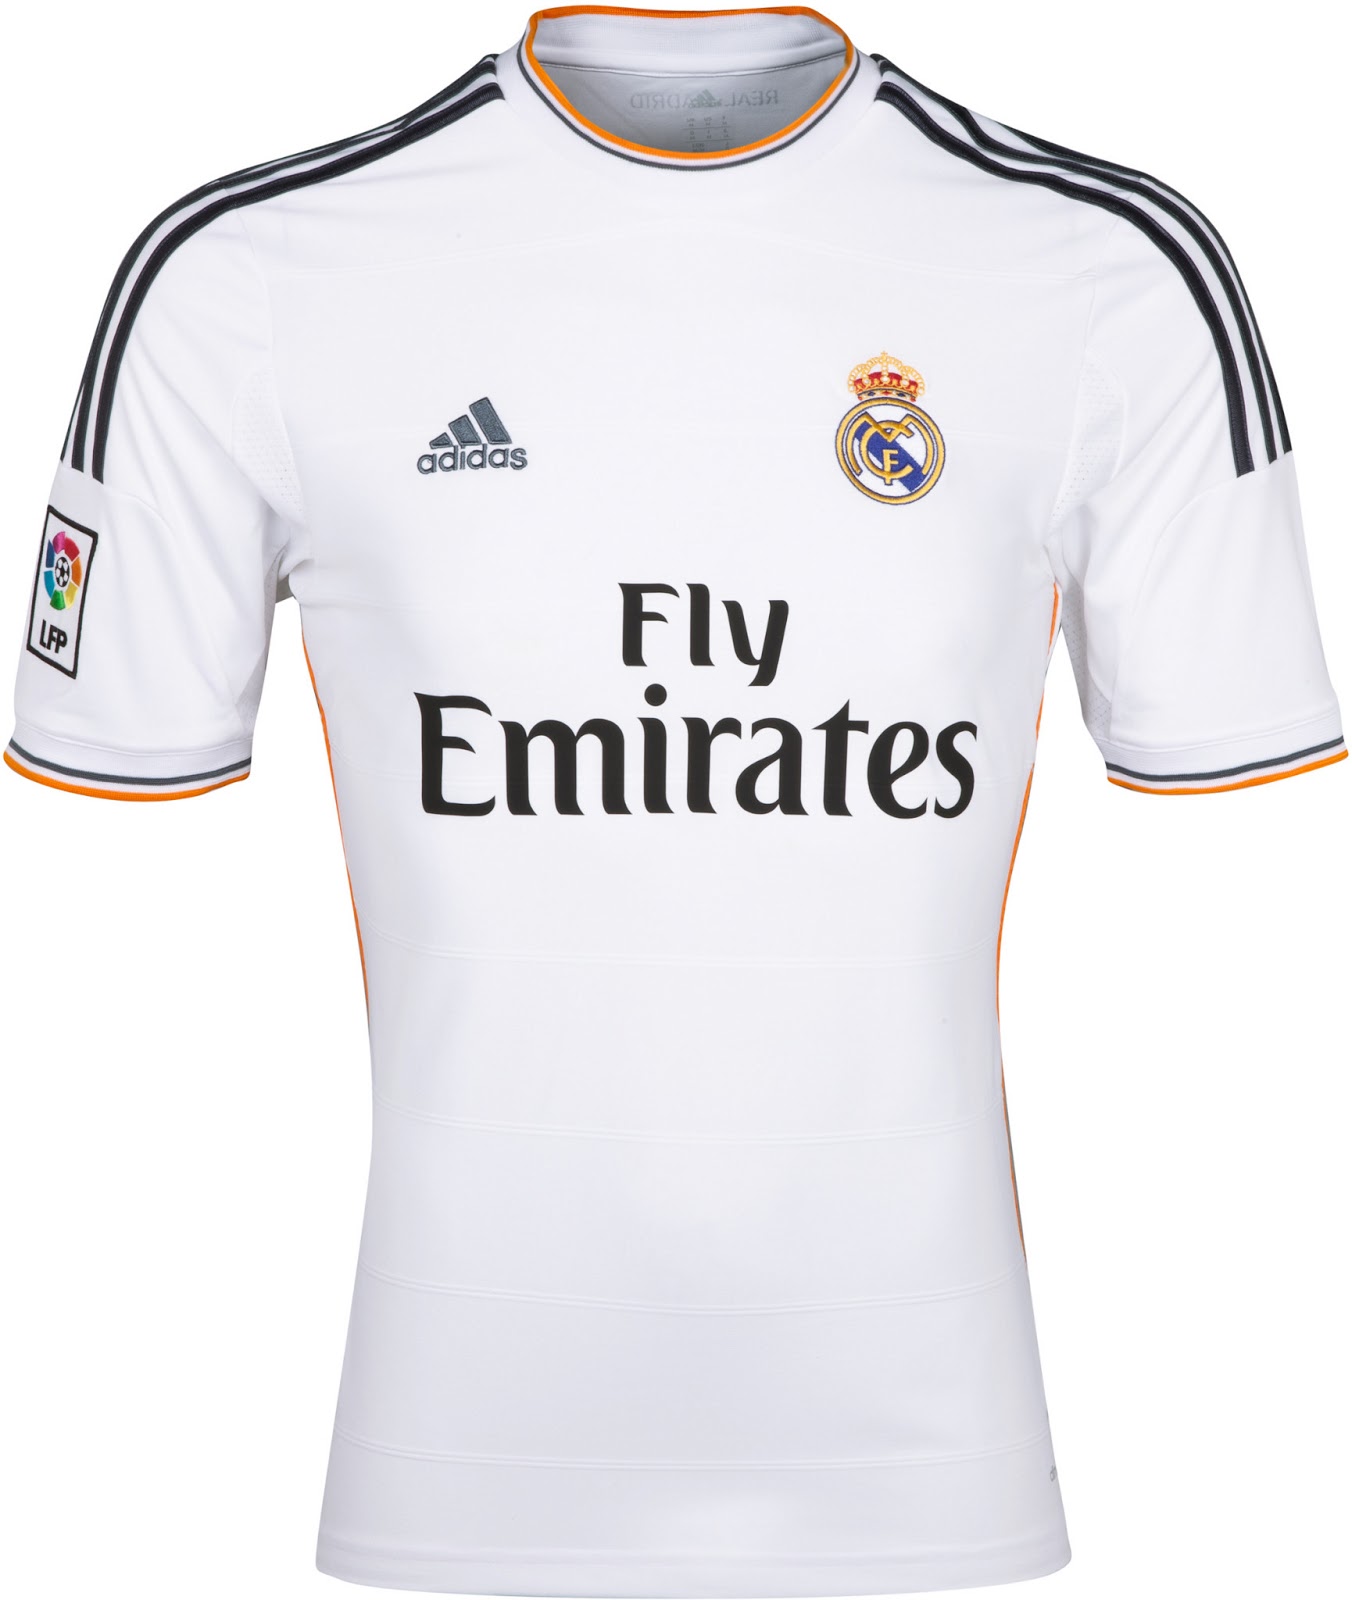 Real Madrid 13 14 Home Away And Third Kits Released Footy Headlines